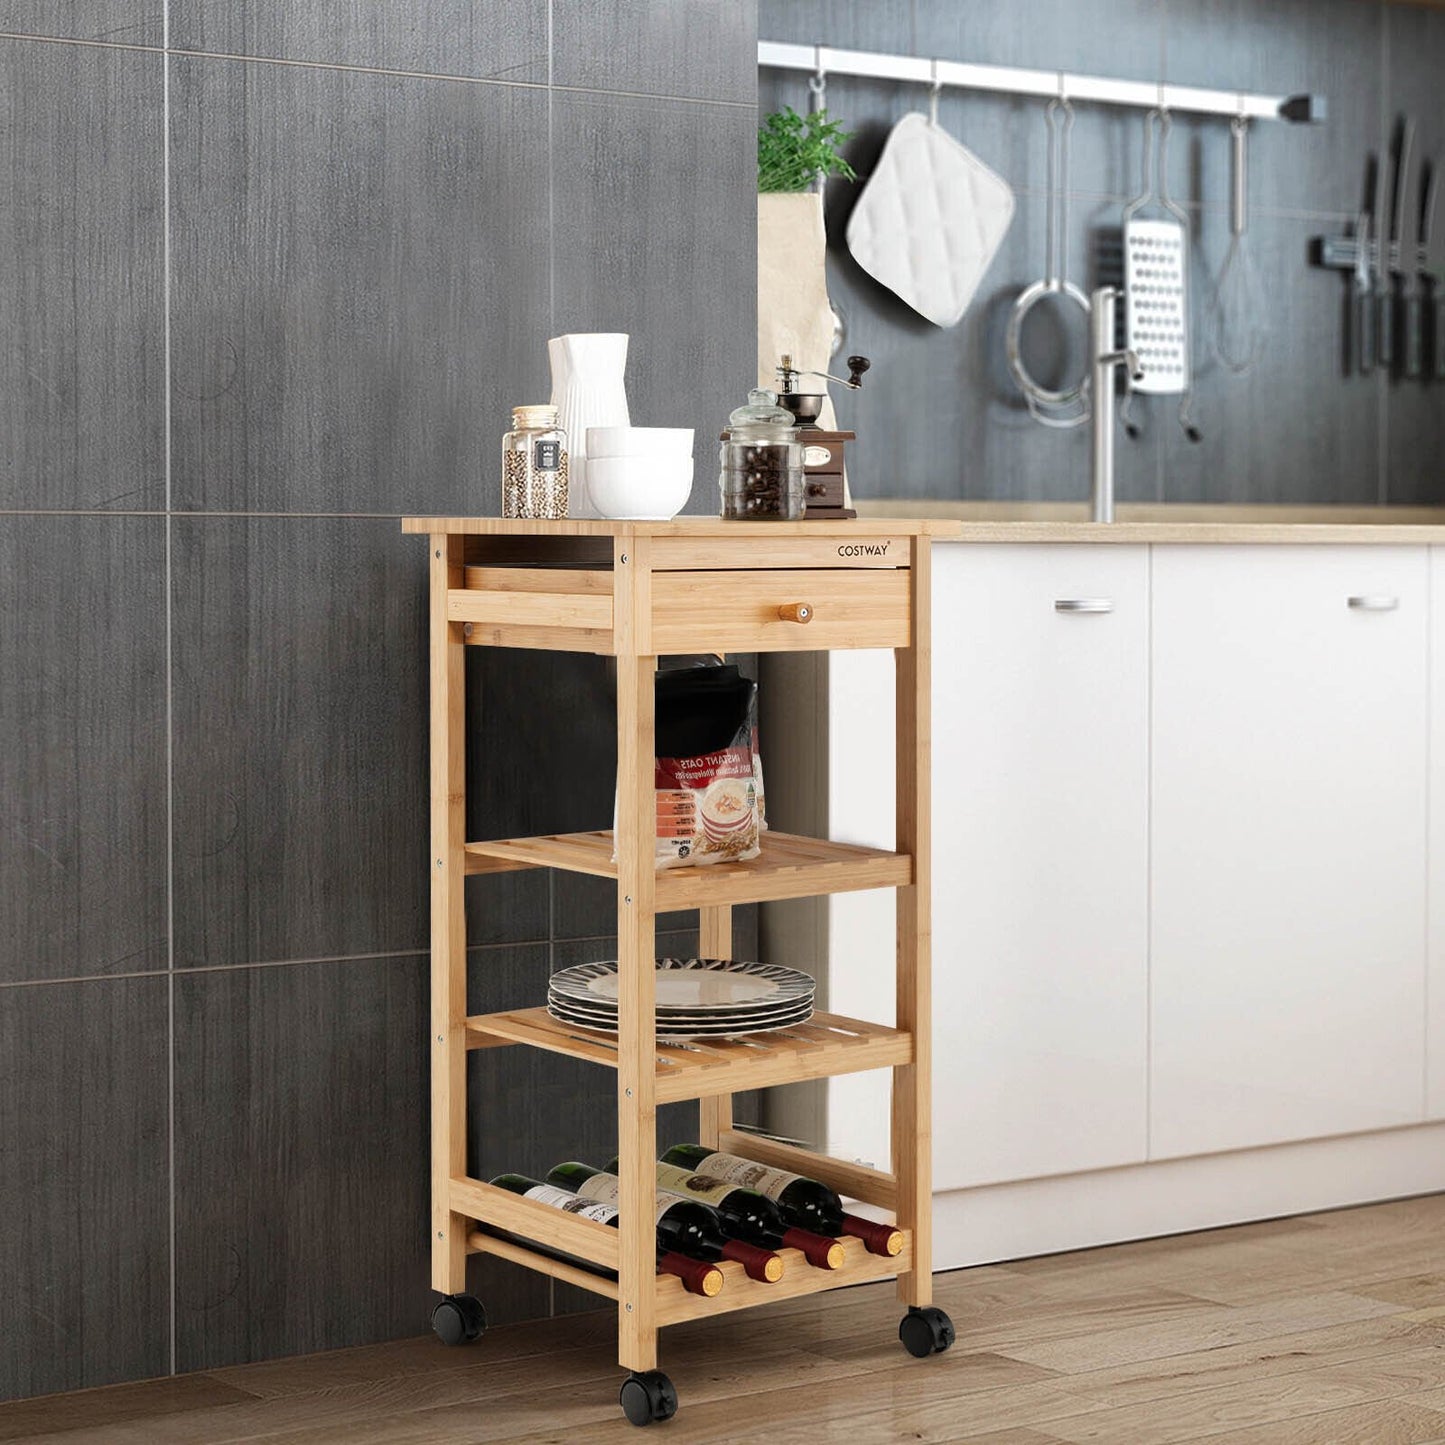 Bamboo Rolling Kitchen Trolley Cart with Drawer and Wine Rack, Natural